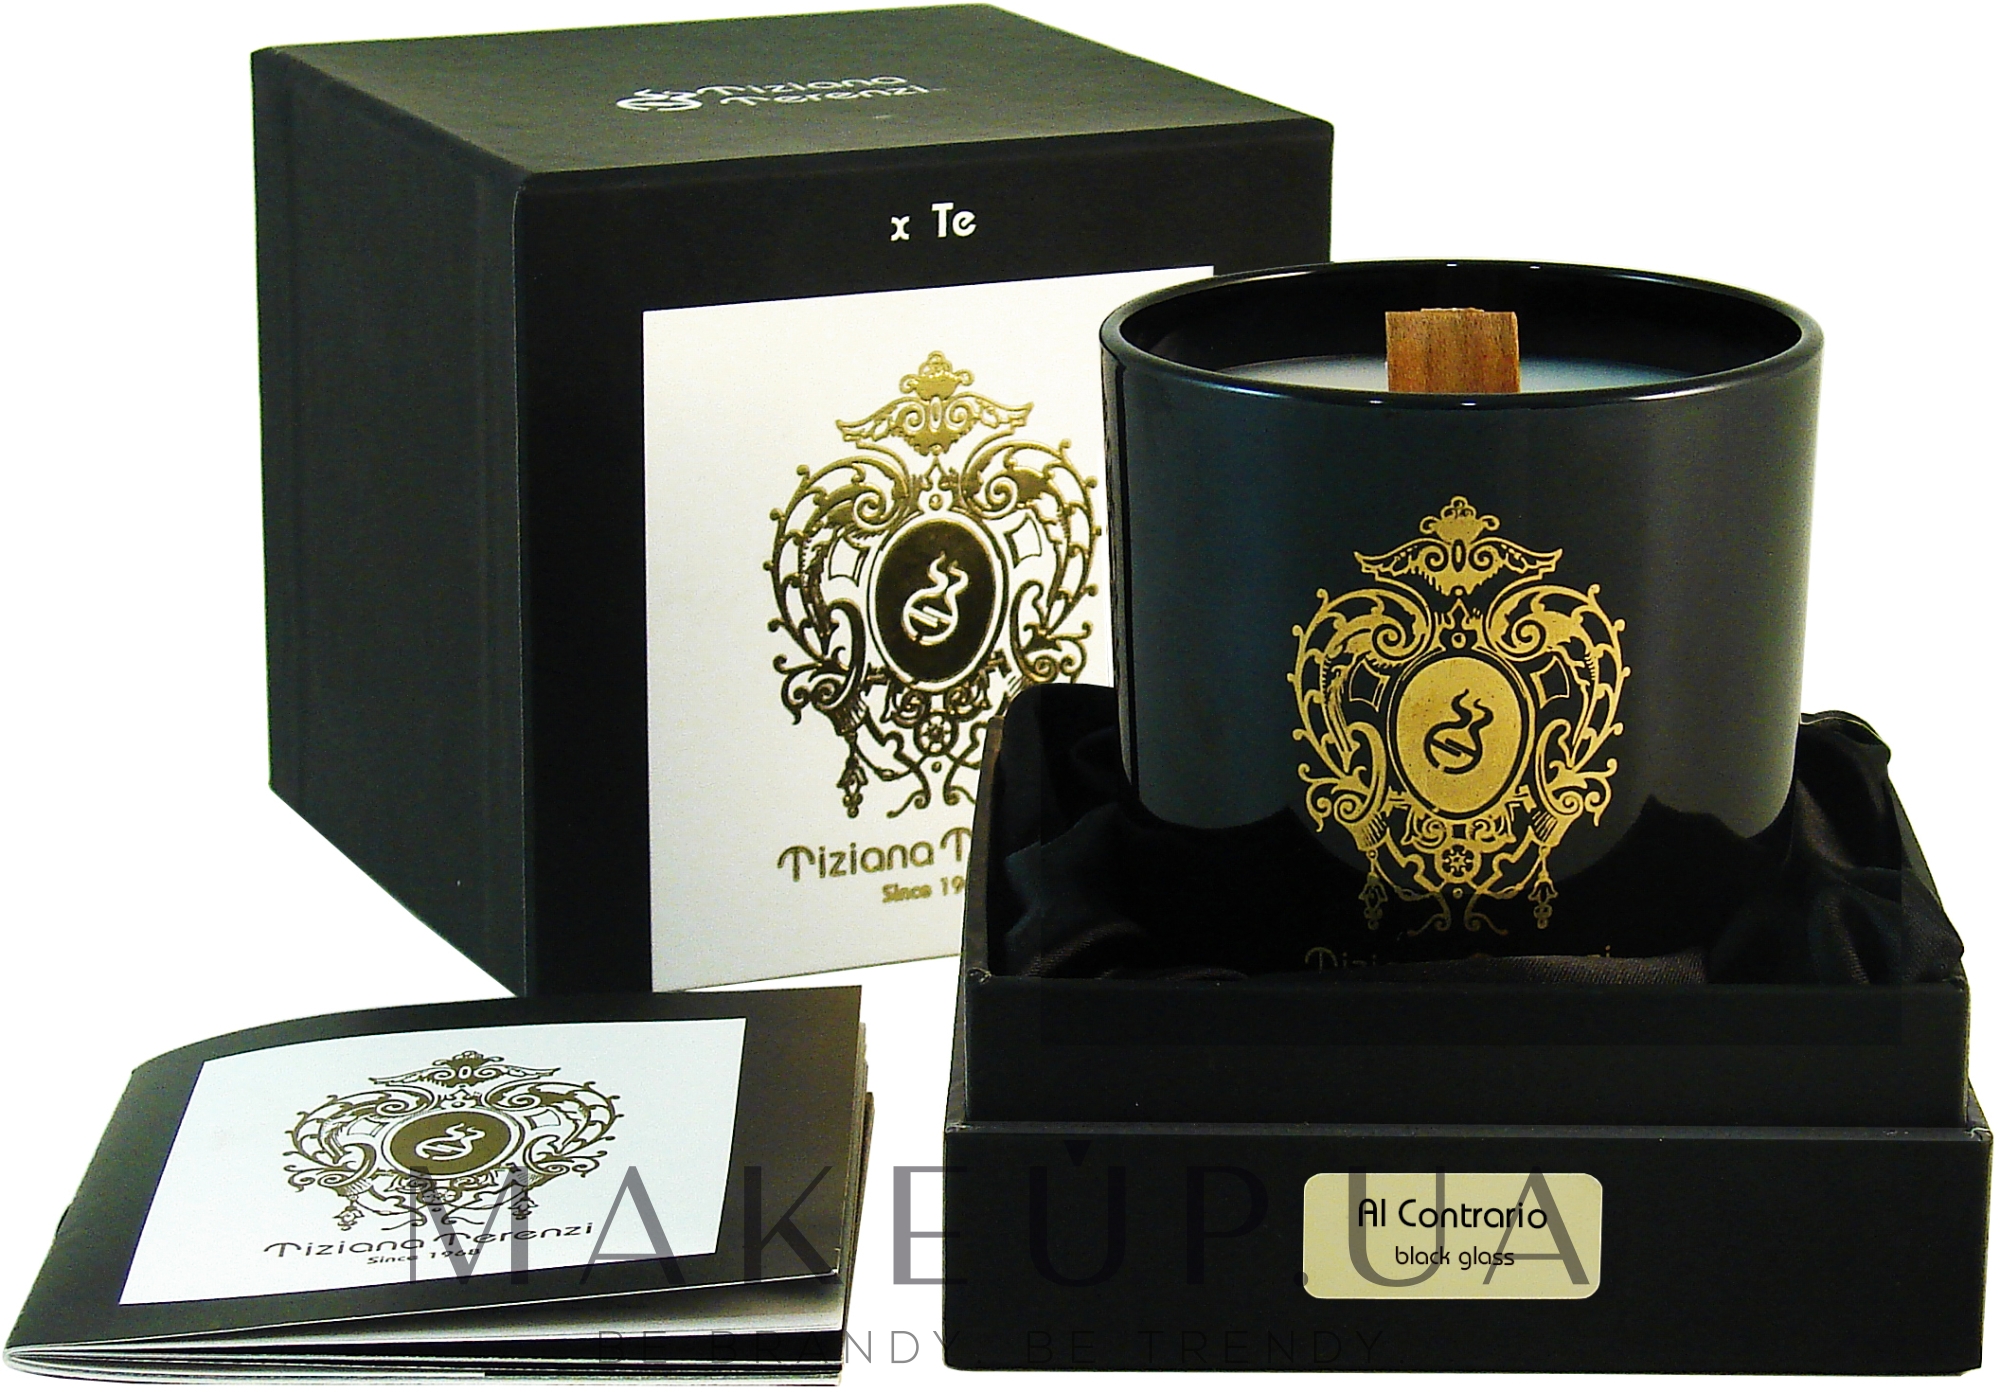 Tiziana Terenzi Al Contrario Scented Candle in Black Glass - Ароматична свічка — фото 170g